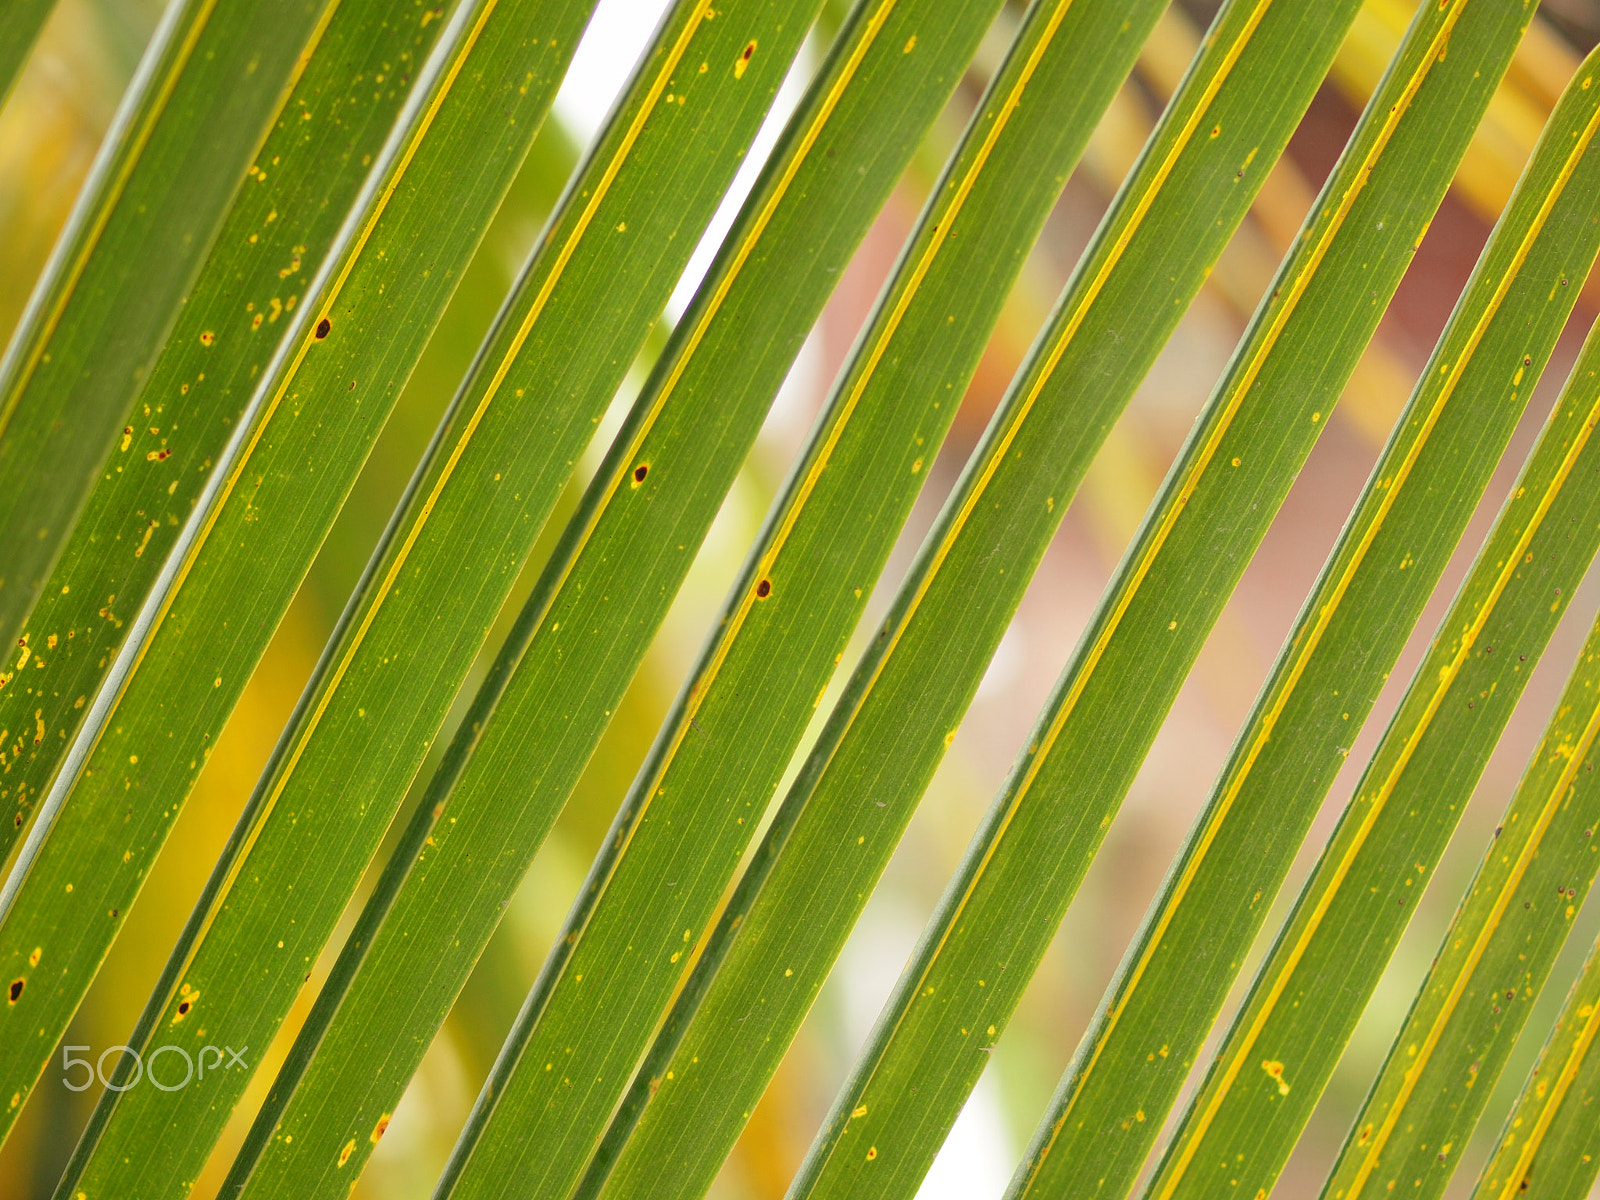 Olympus E-620 (EVOLT E-620) + OLYMPUS 50mm Lens sample photo. Coconut leaf in pattern photography